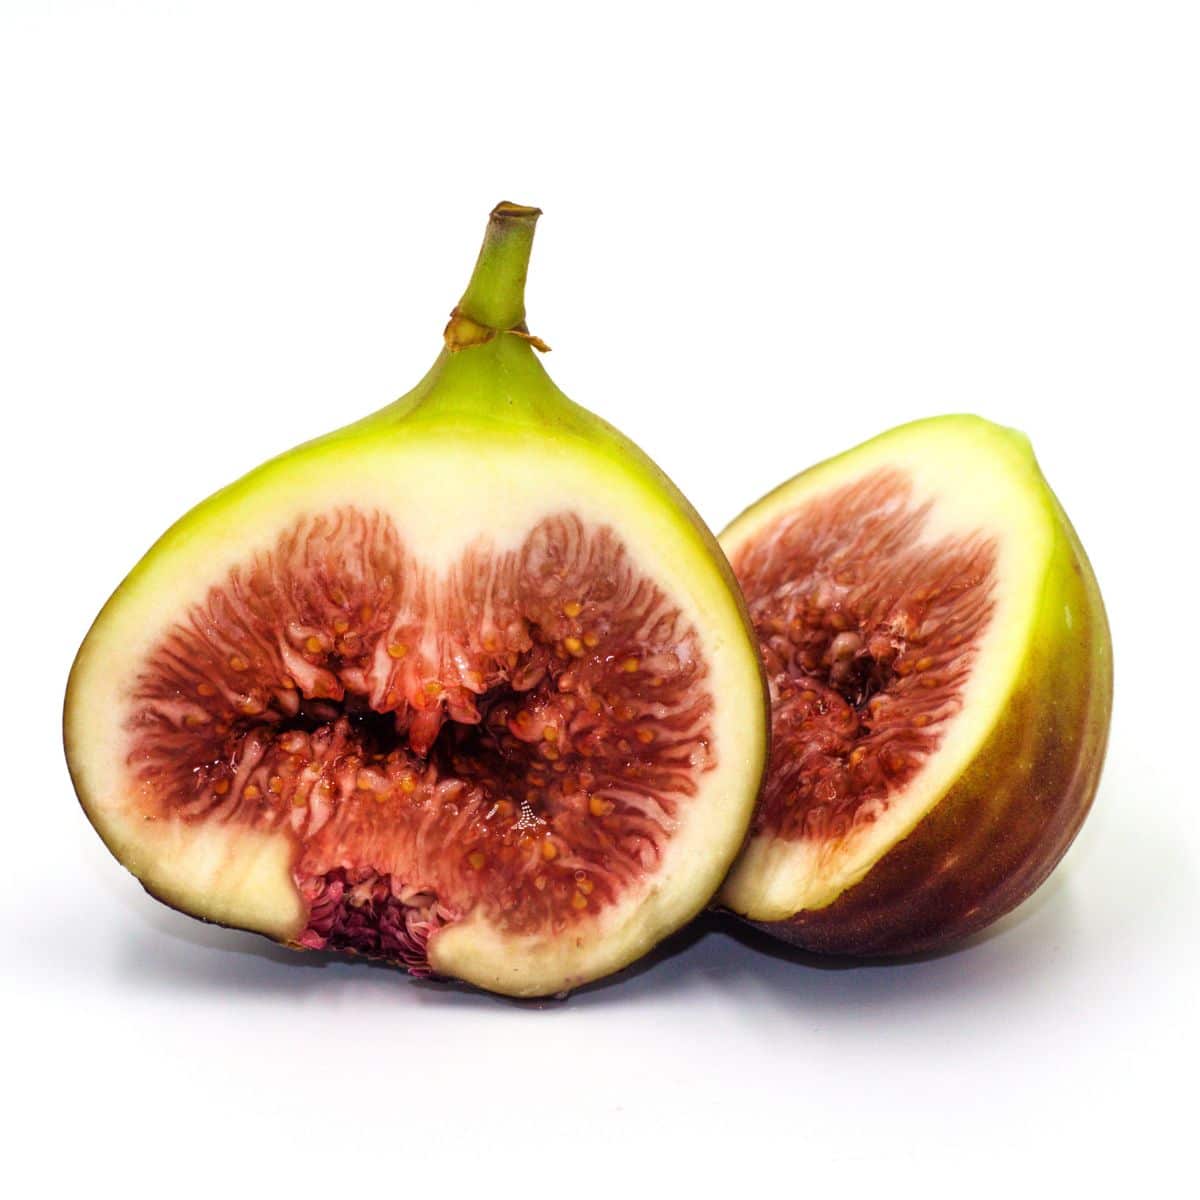 Brown turkey fig on an isolated white background.